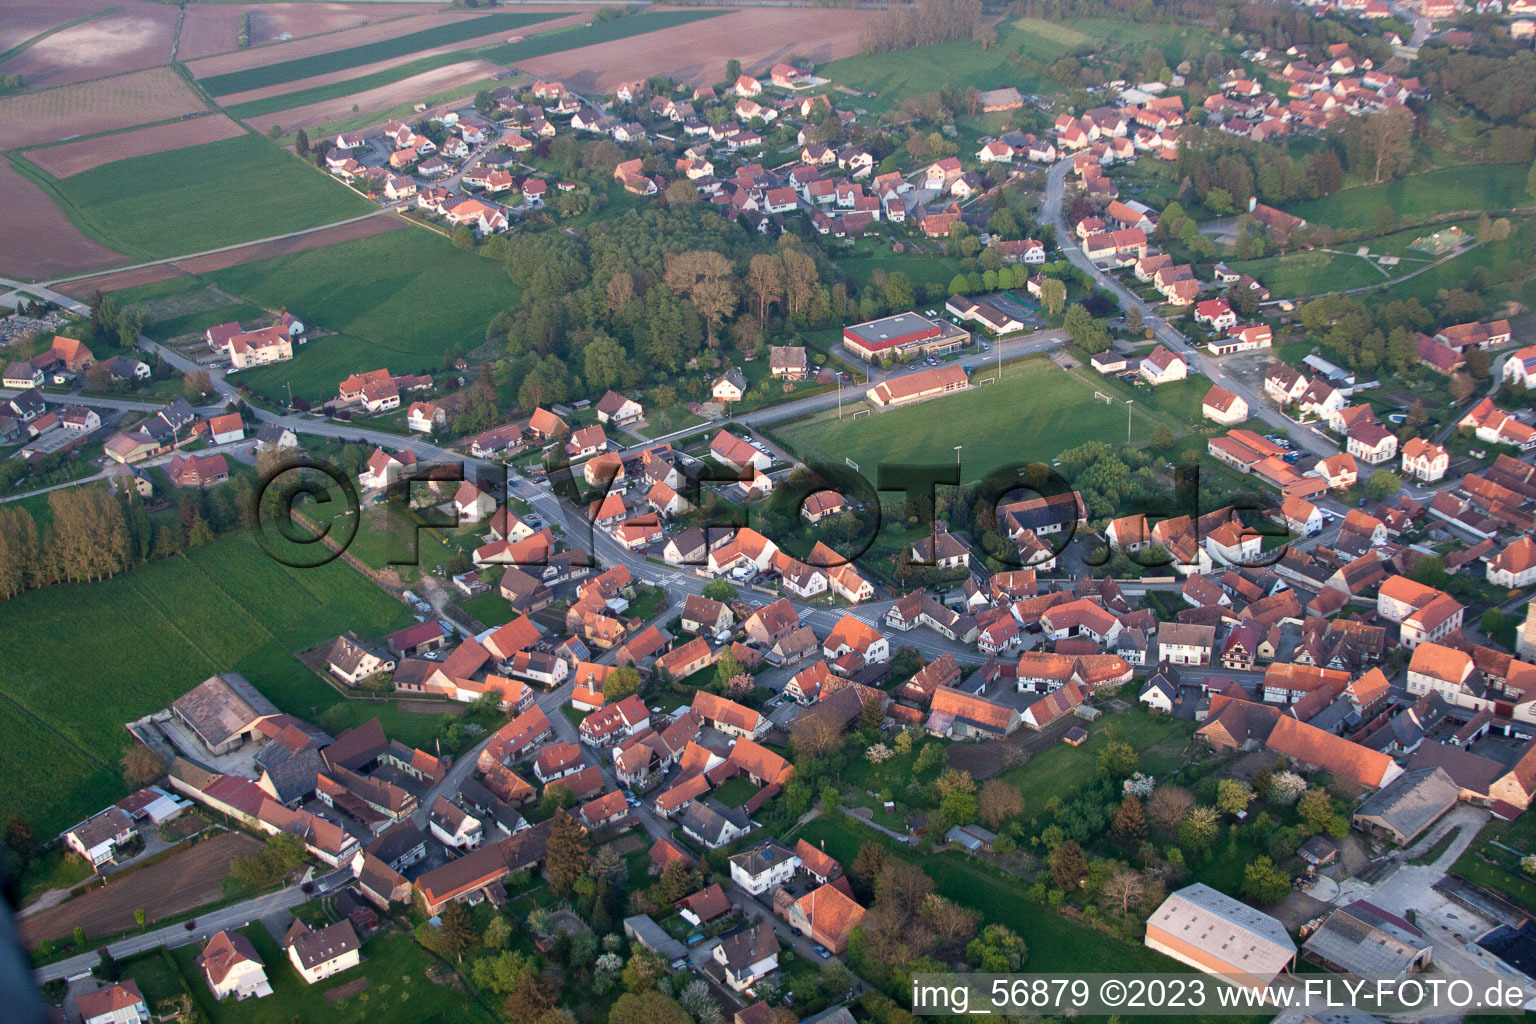 Drone image of Riedseltz in the state Bas-Rhin, France